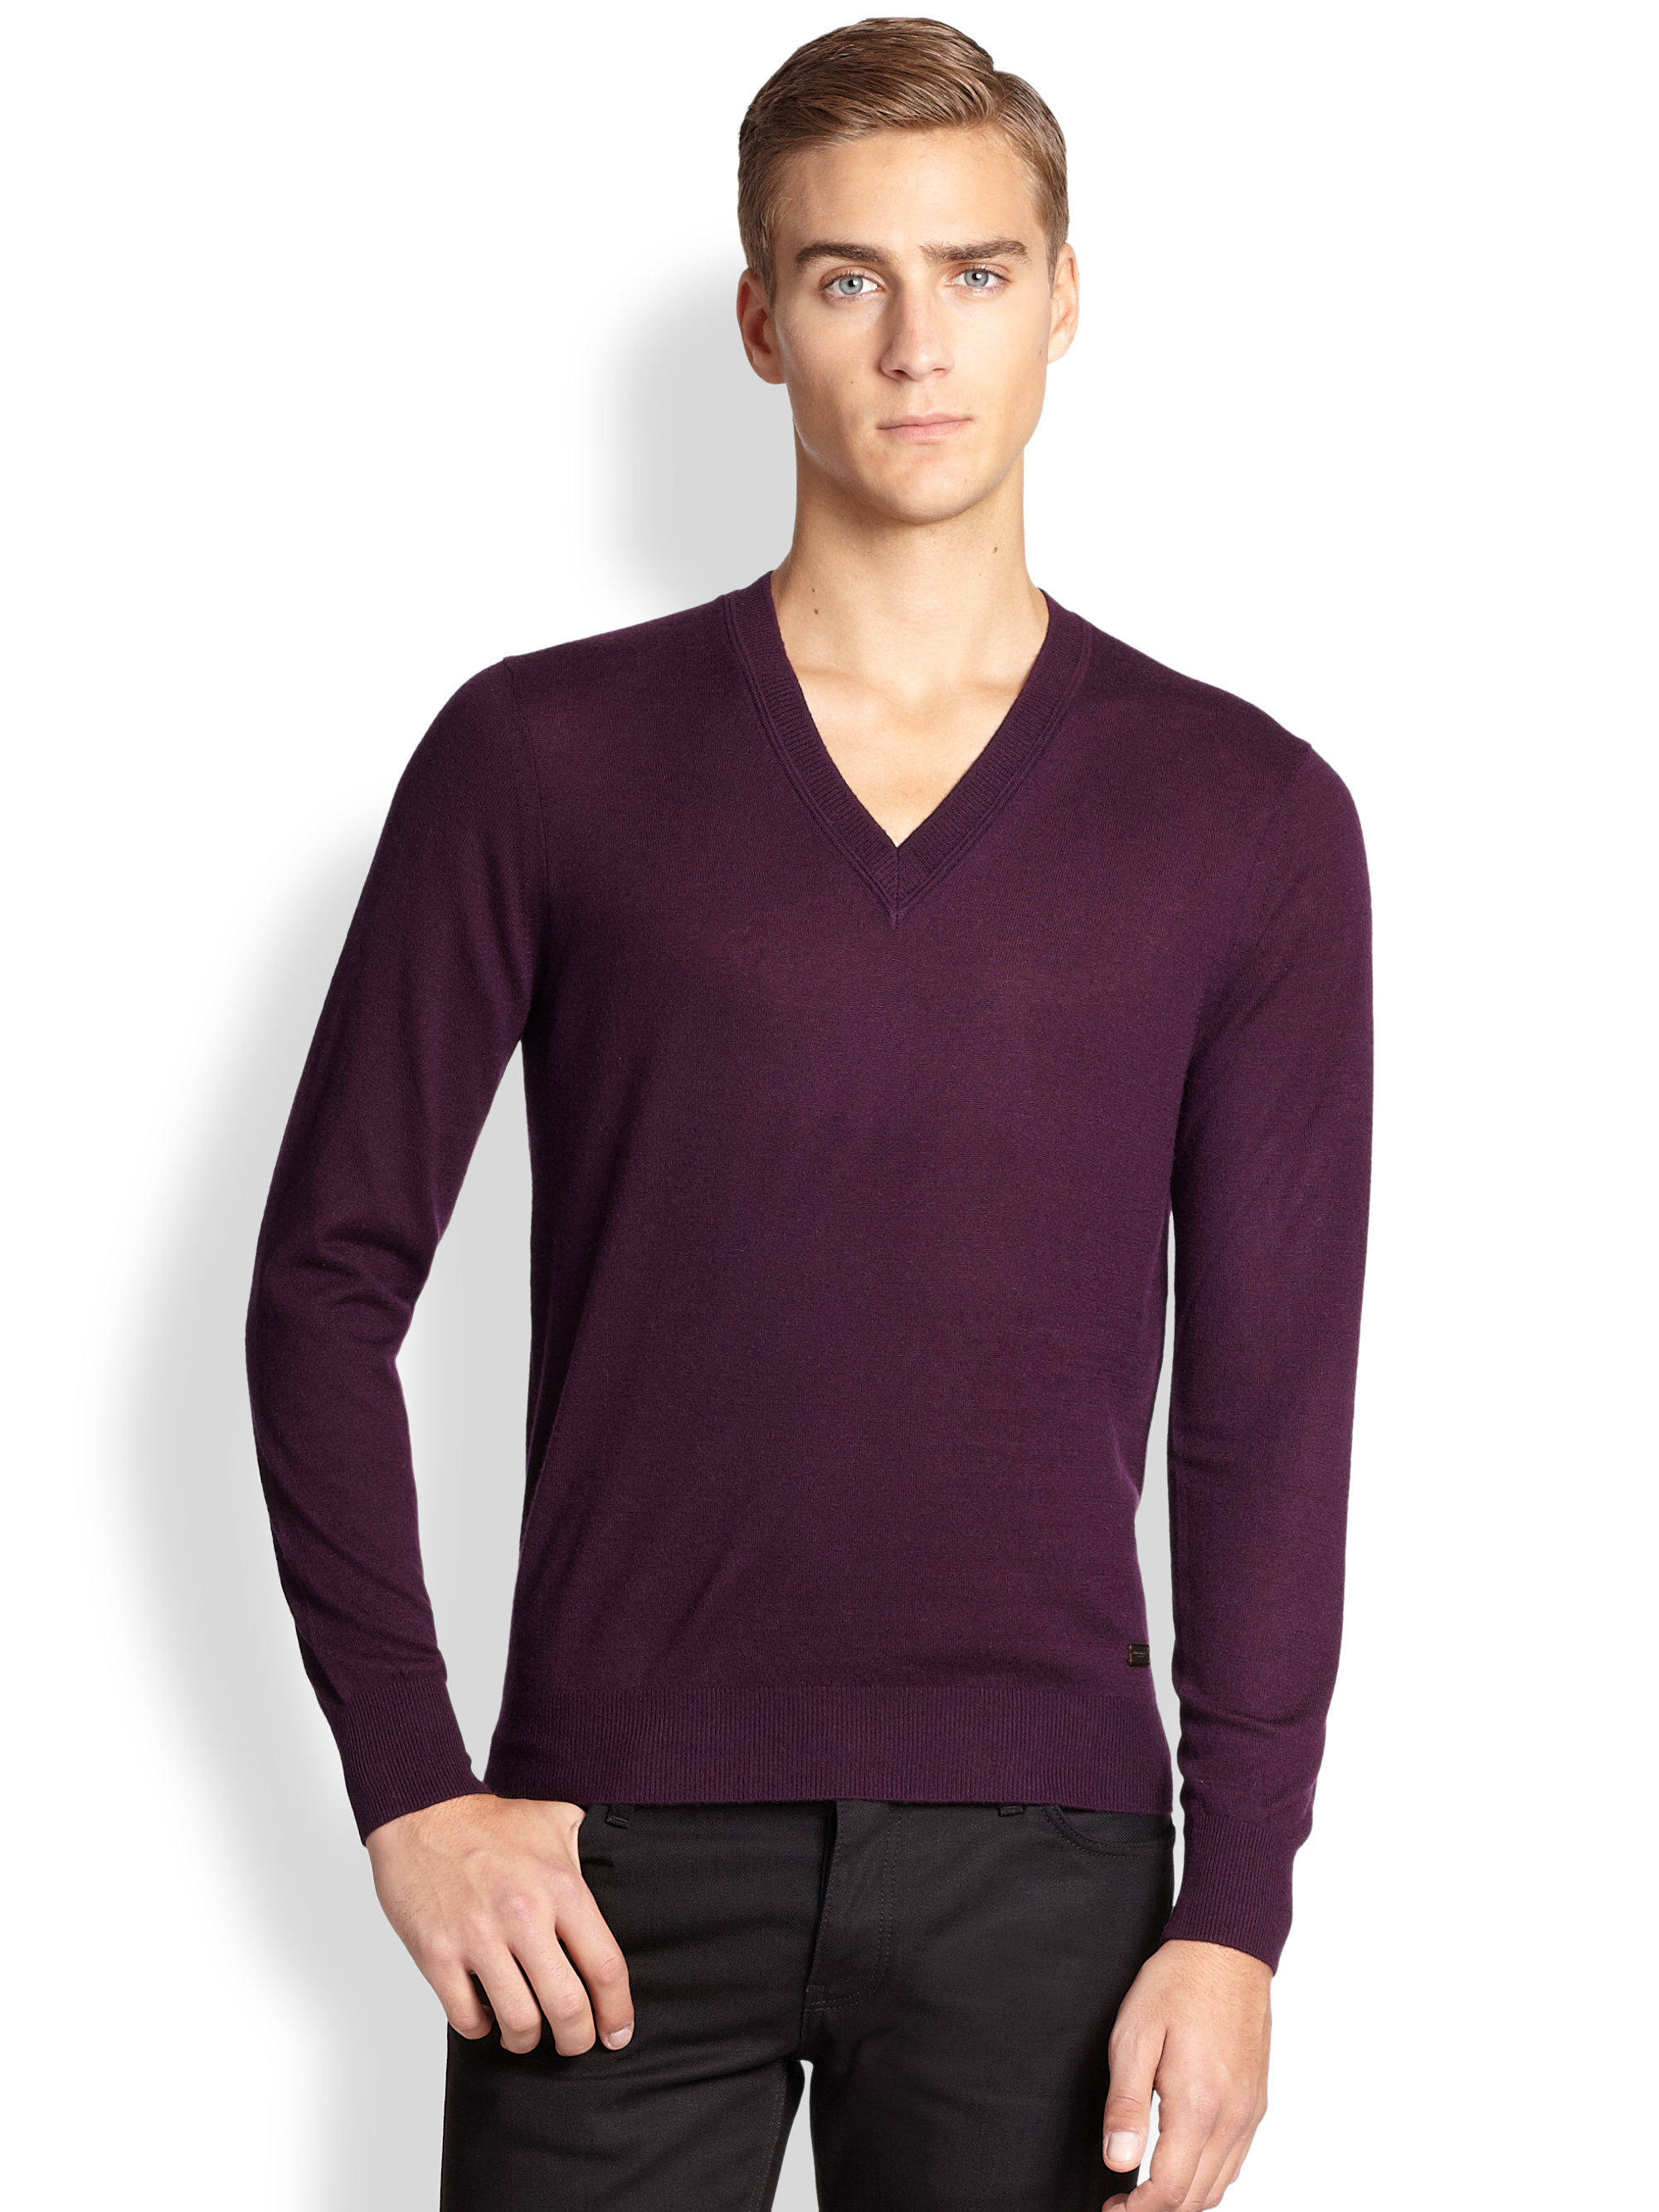 Burberry Regal Cashmere V-Neck Sweater in Purple for Men - Lyst